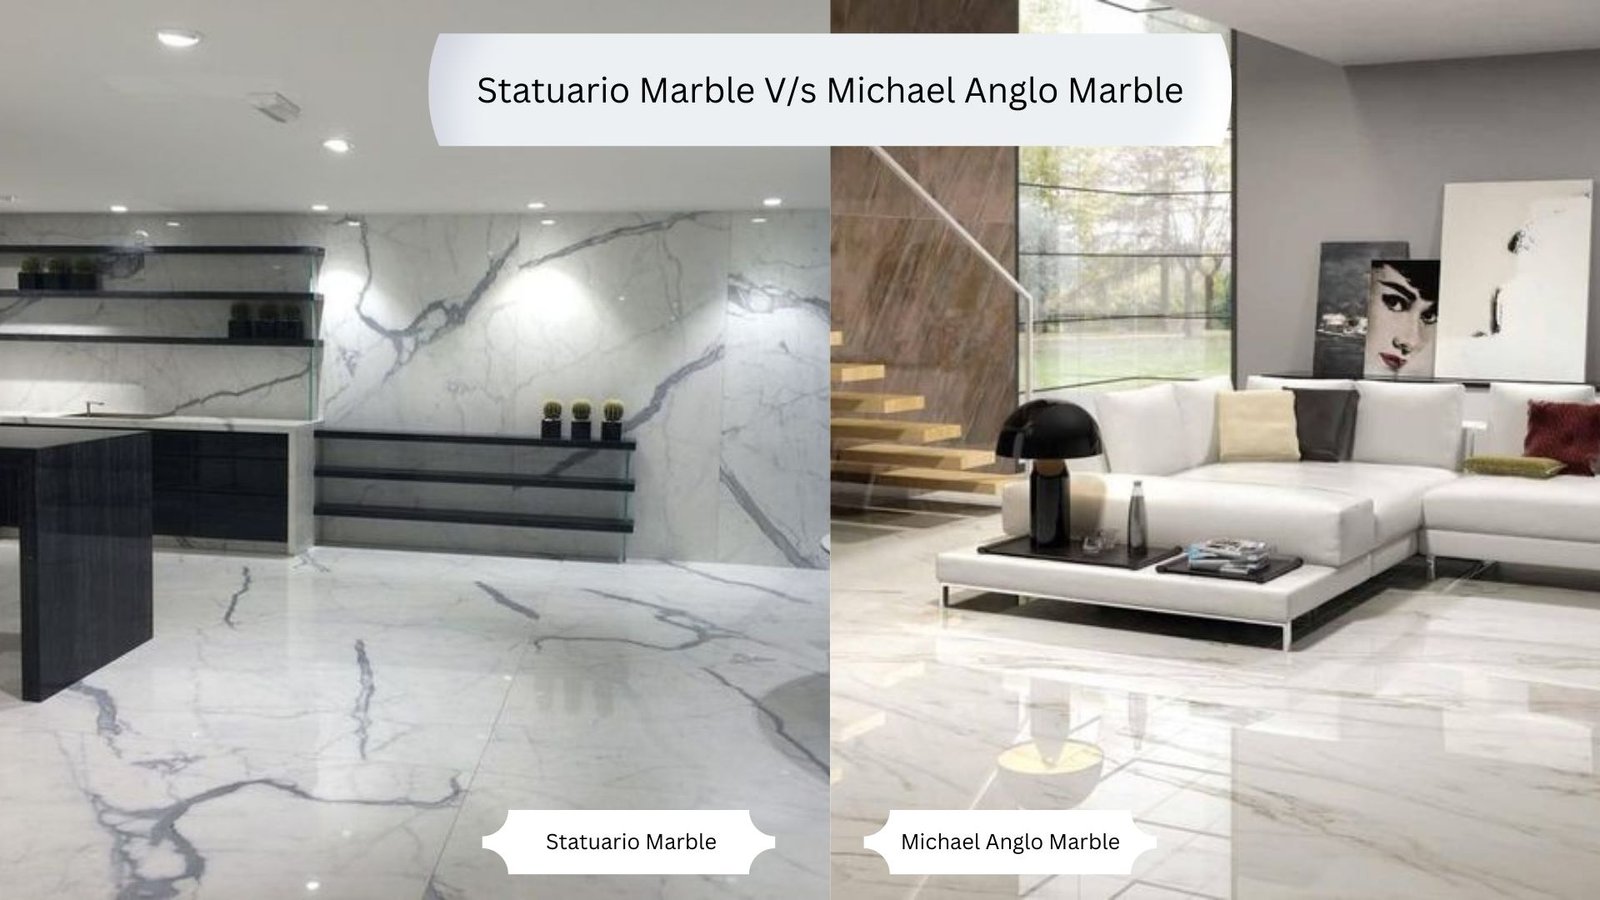 Statuario Marble V/s Michael Anglo Marble